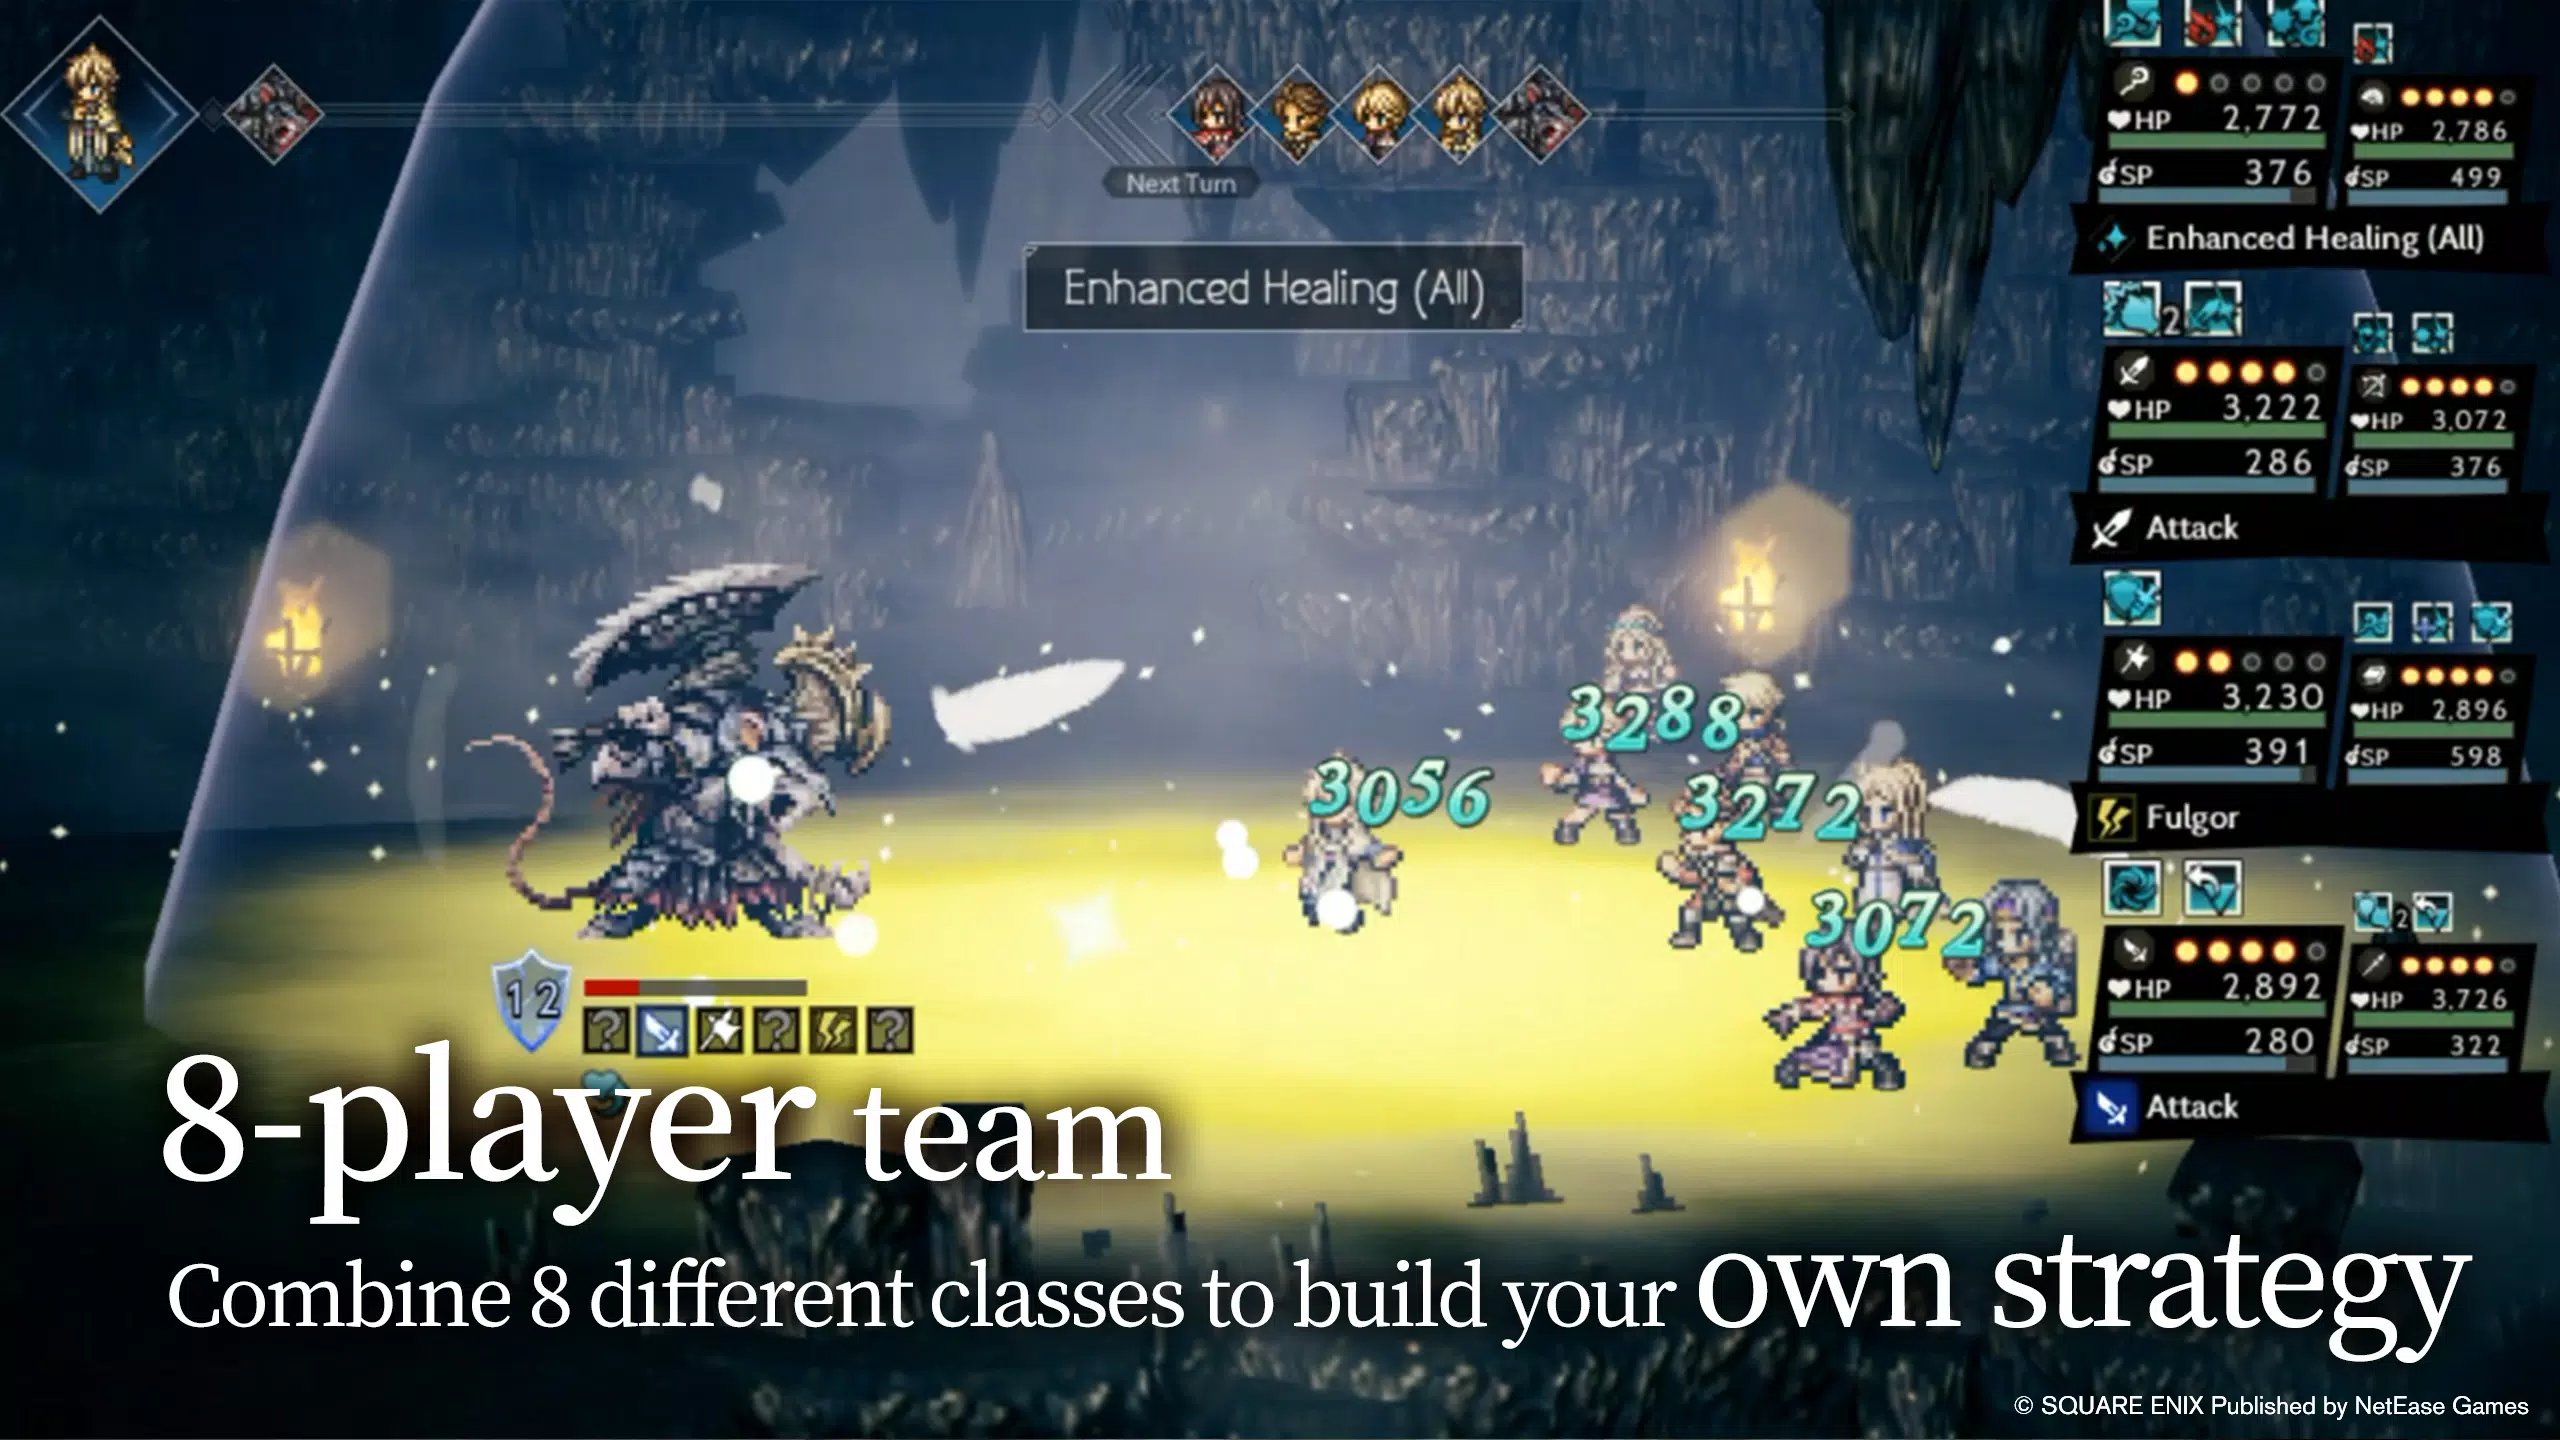 Free Free Octopath Traveler apk download android ios APK Download